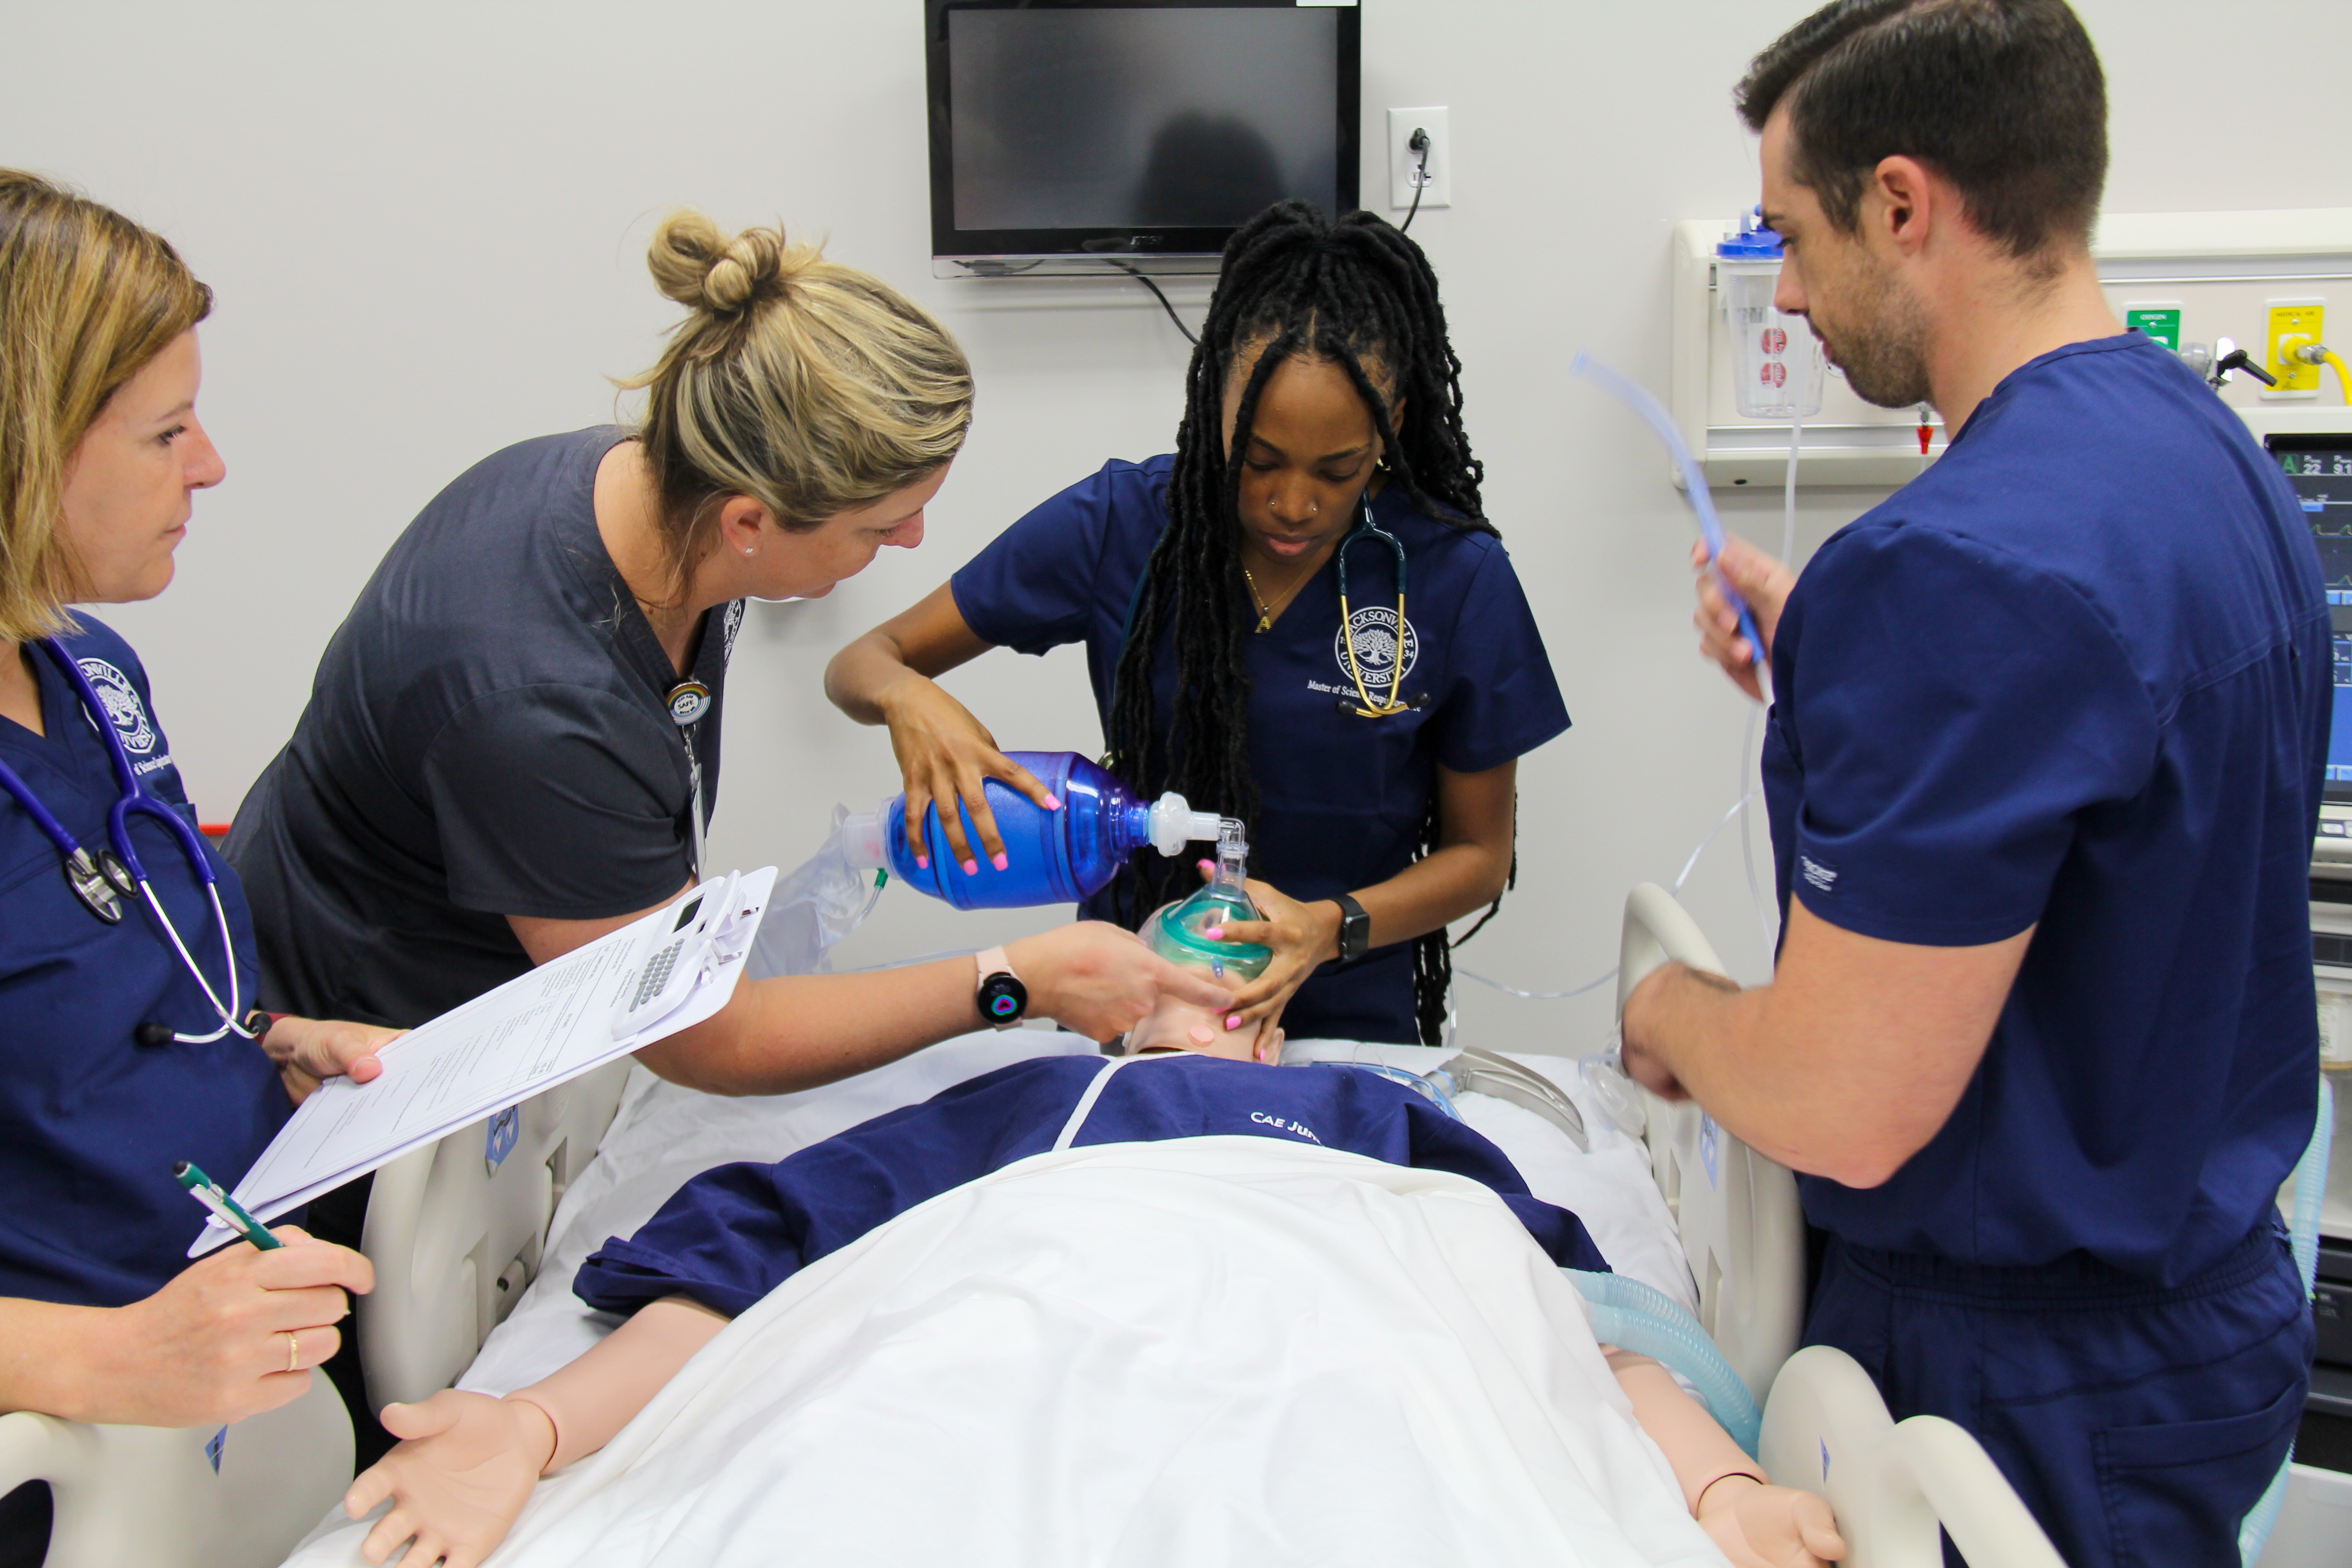 A team of respiratory therapists using a respiratory device on a model patient.